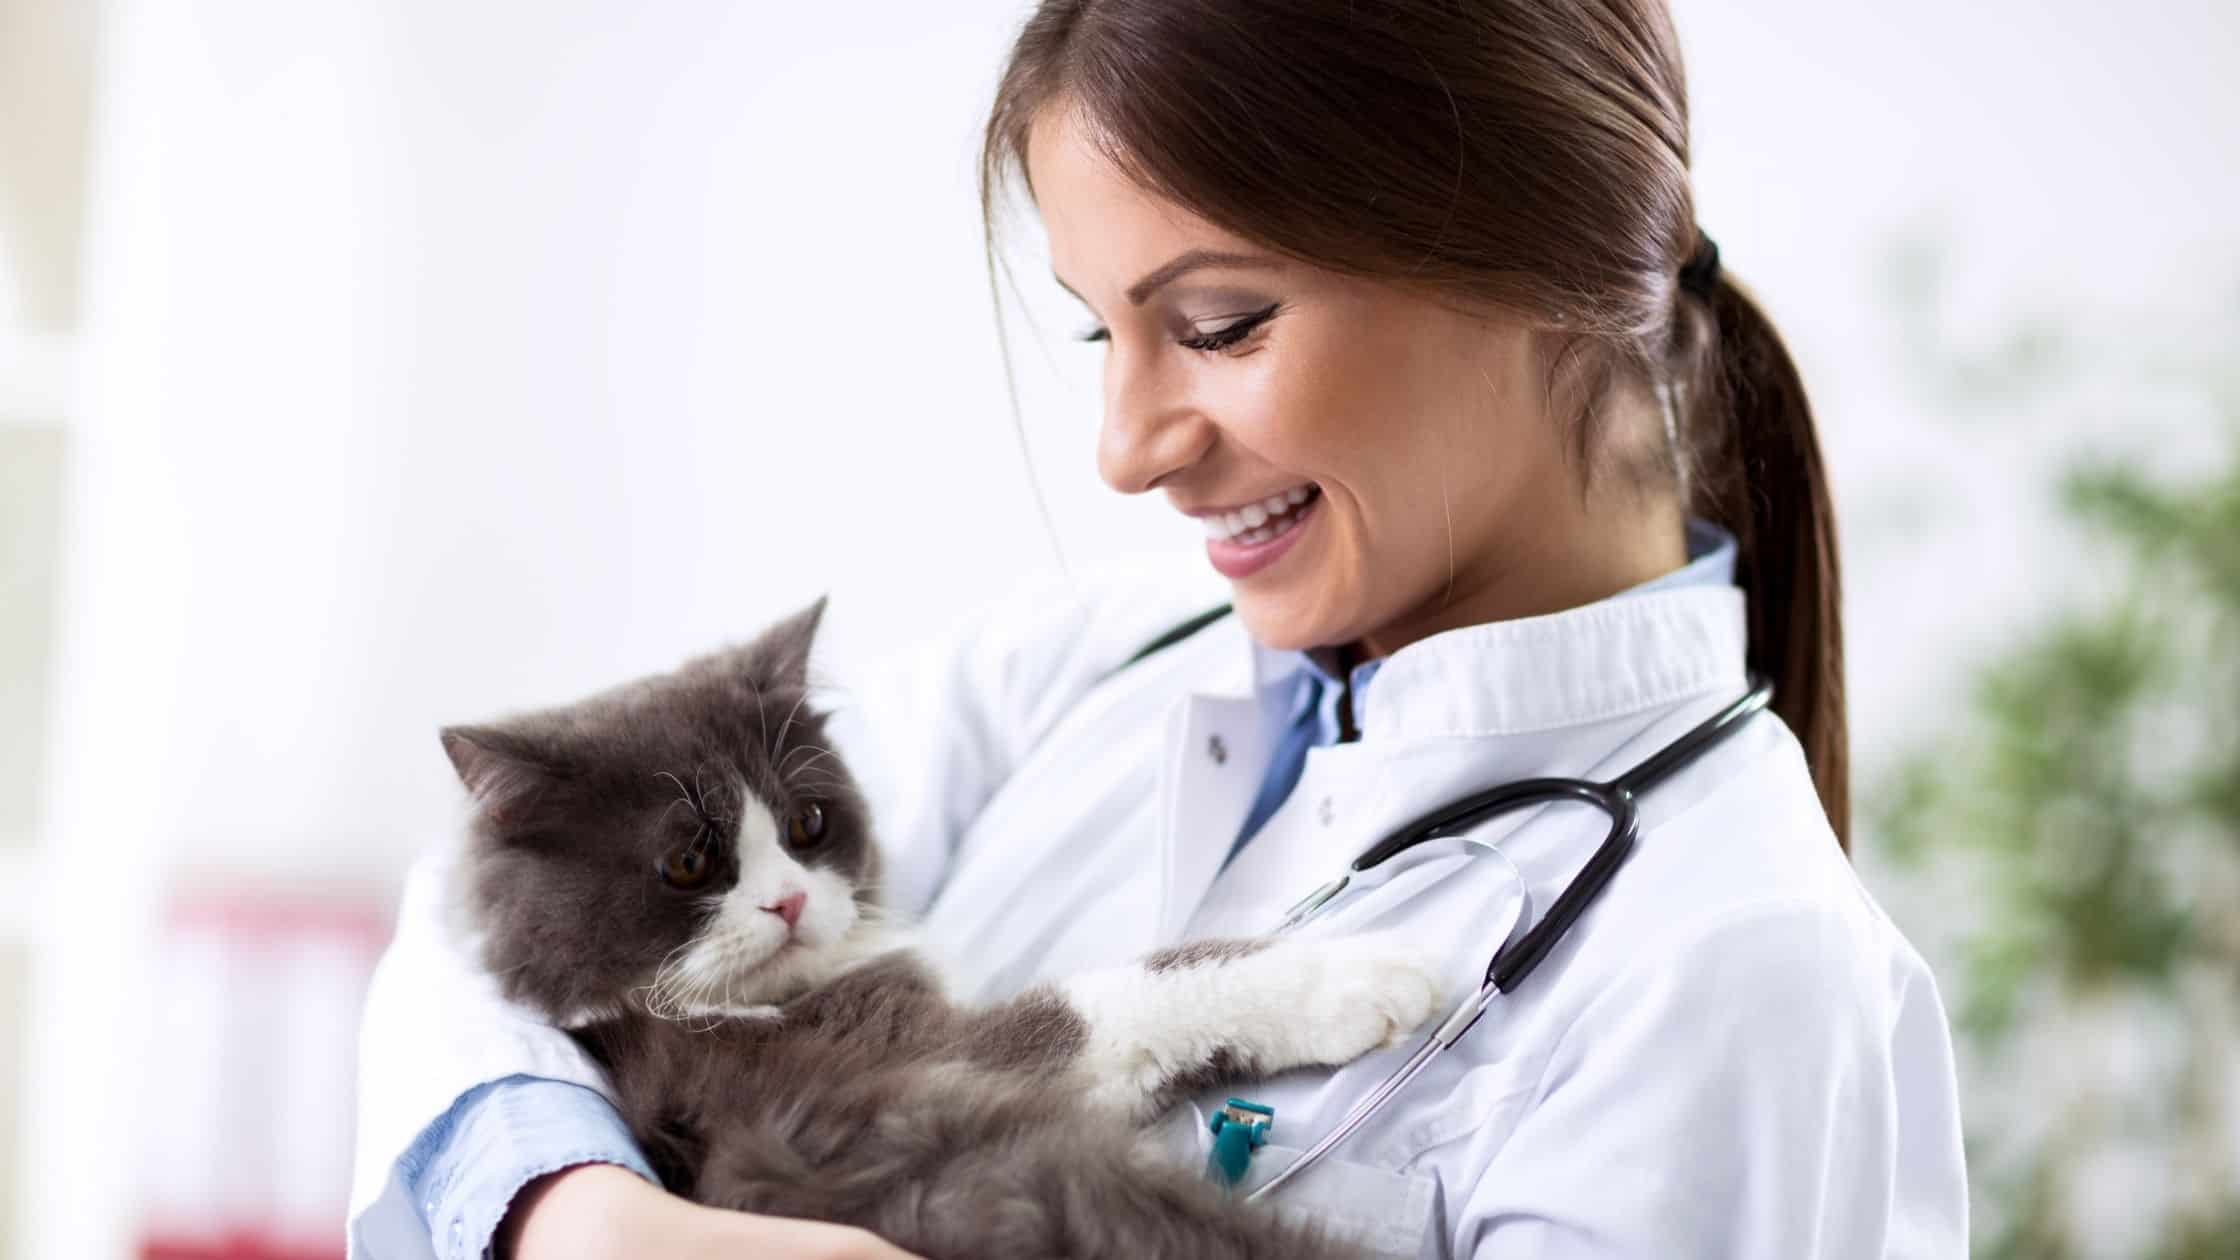 Things to remember when choosing a vet for your pet